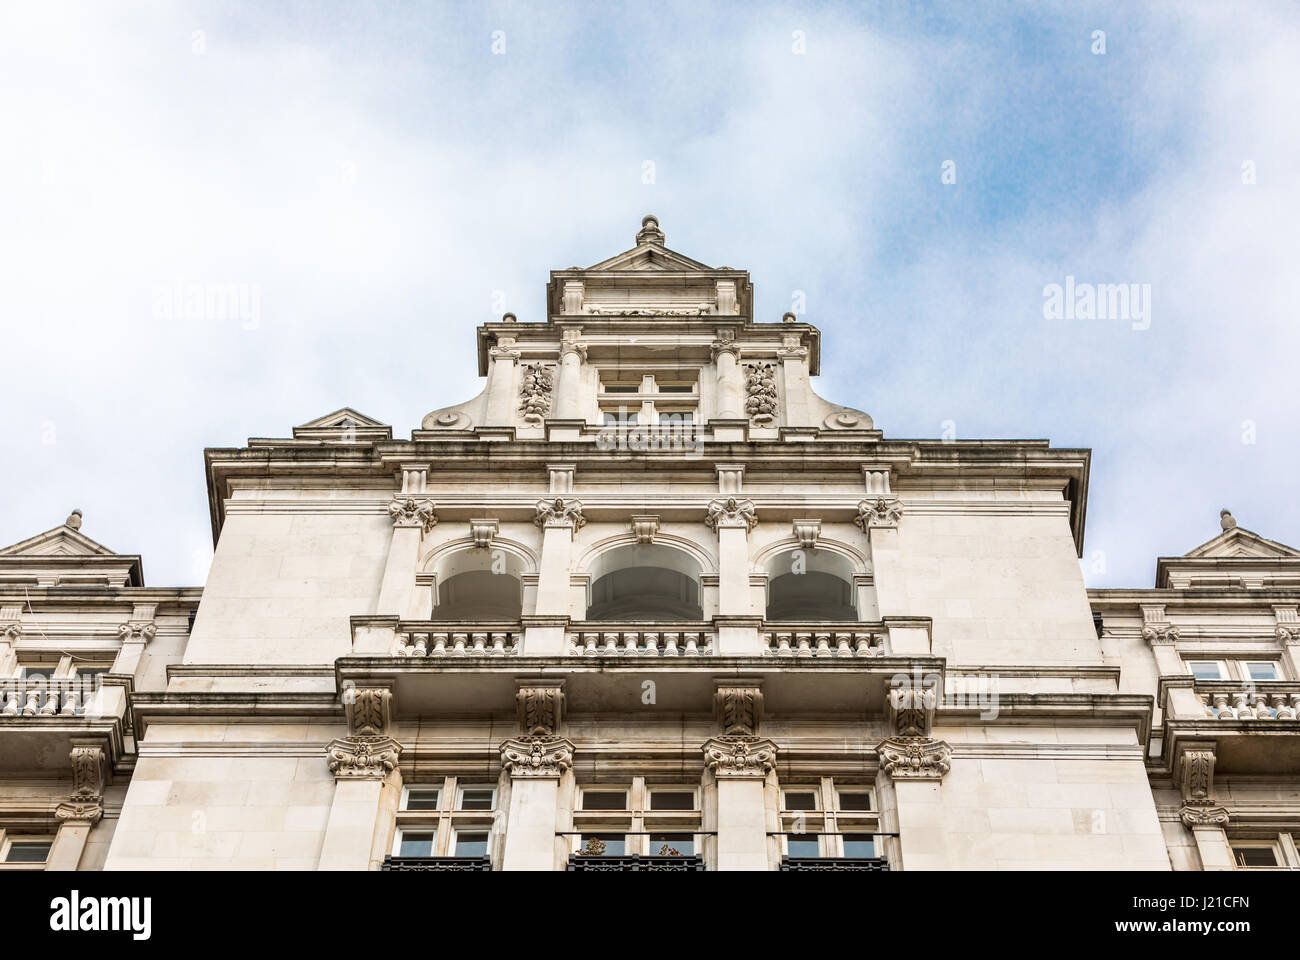 detail of the elaborate facade of an old London building, London England, UK Stock Photo